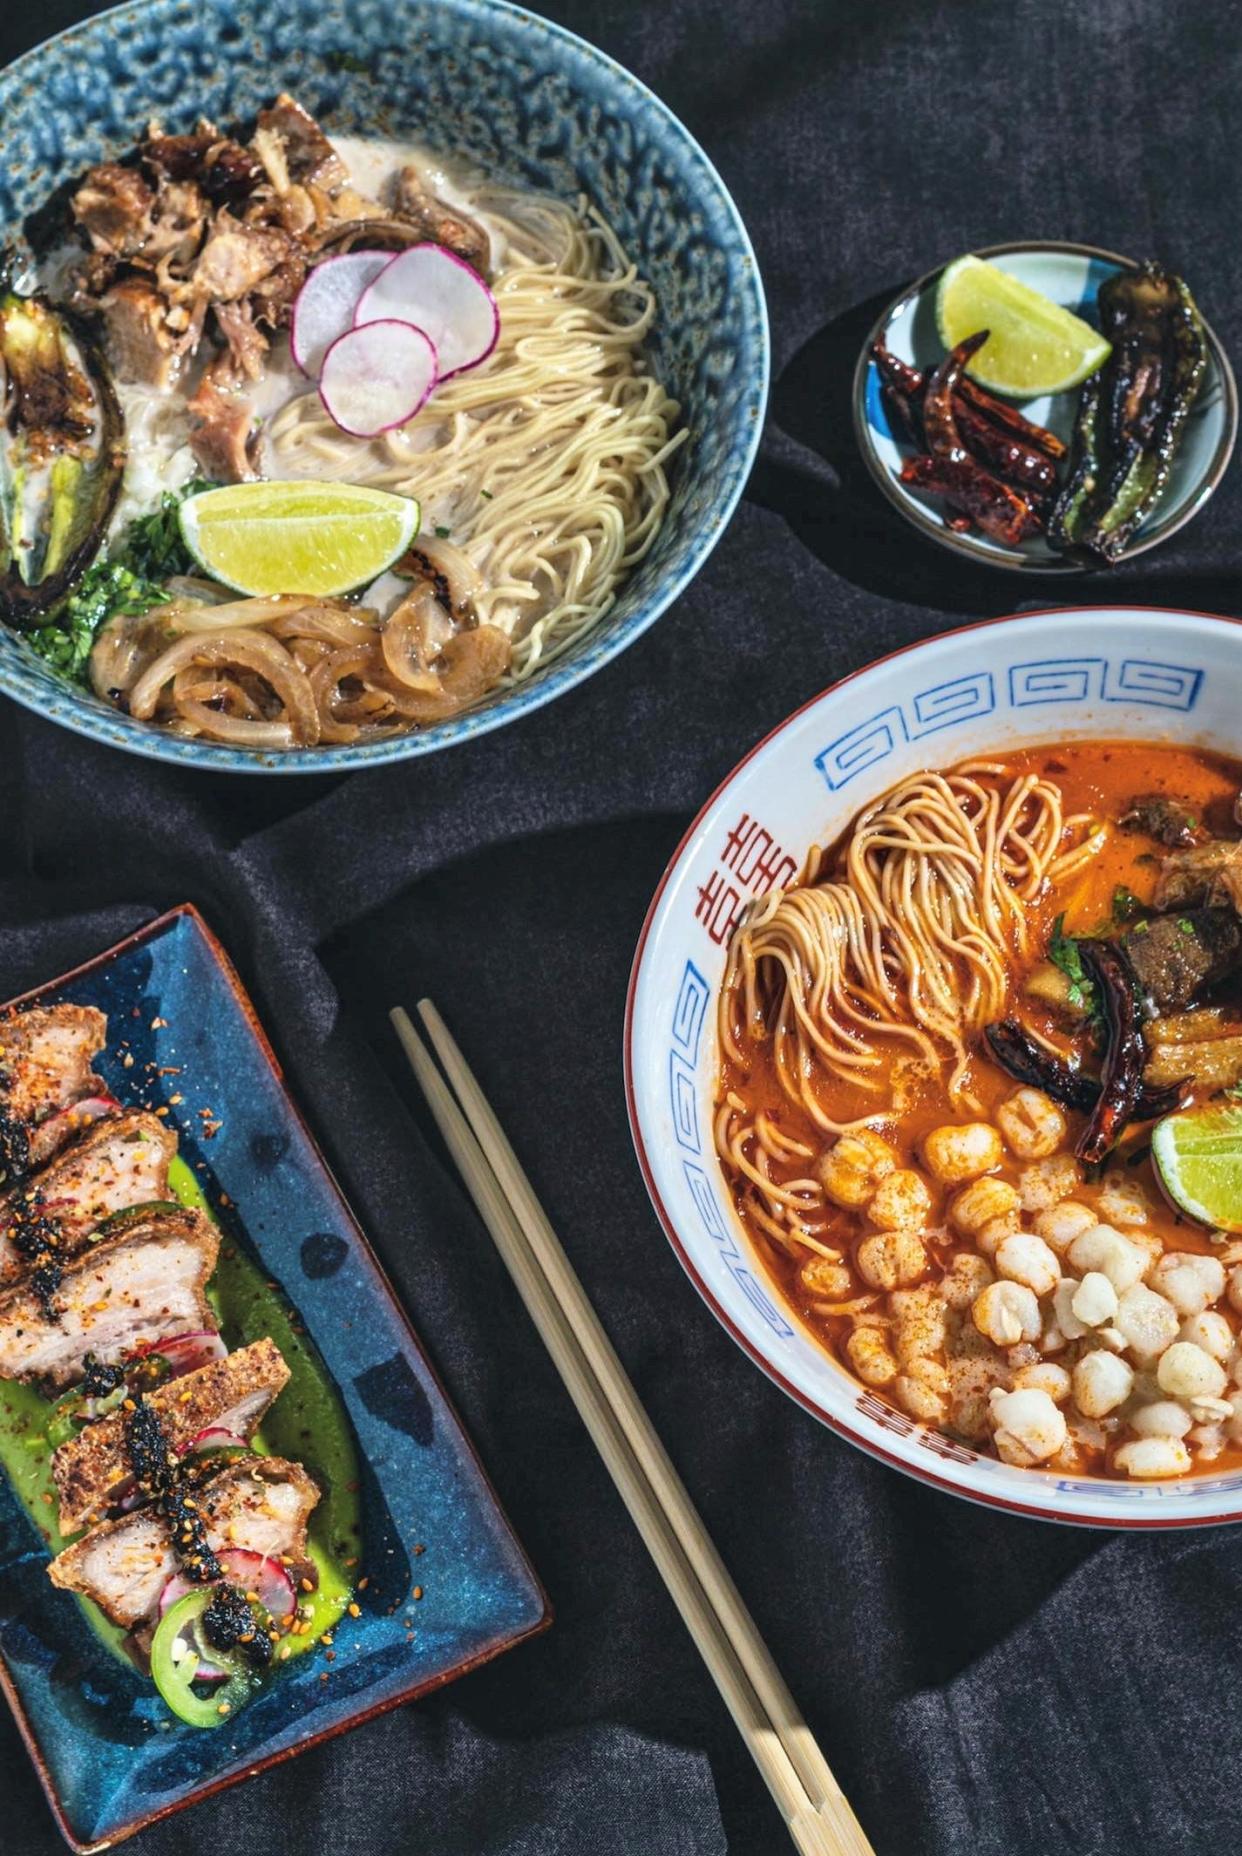 Chef Christopher Krinsky blends the flavors of his youth in Mexico and his time working in Japanese restaurants in Austin at Ramen del Barrio in Hana World Market's food court.